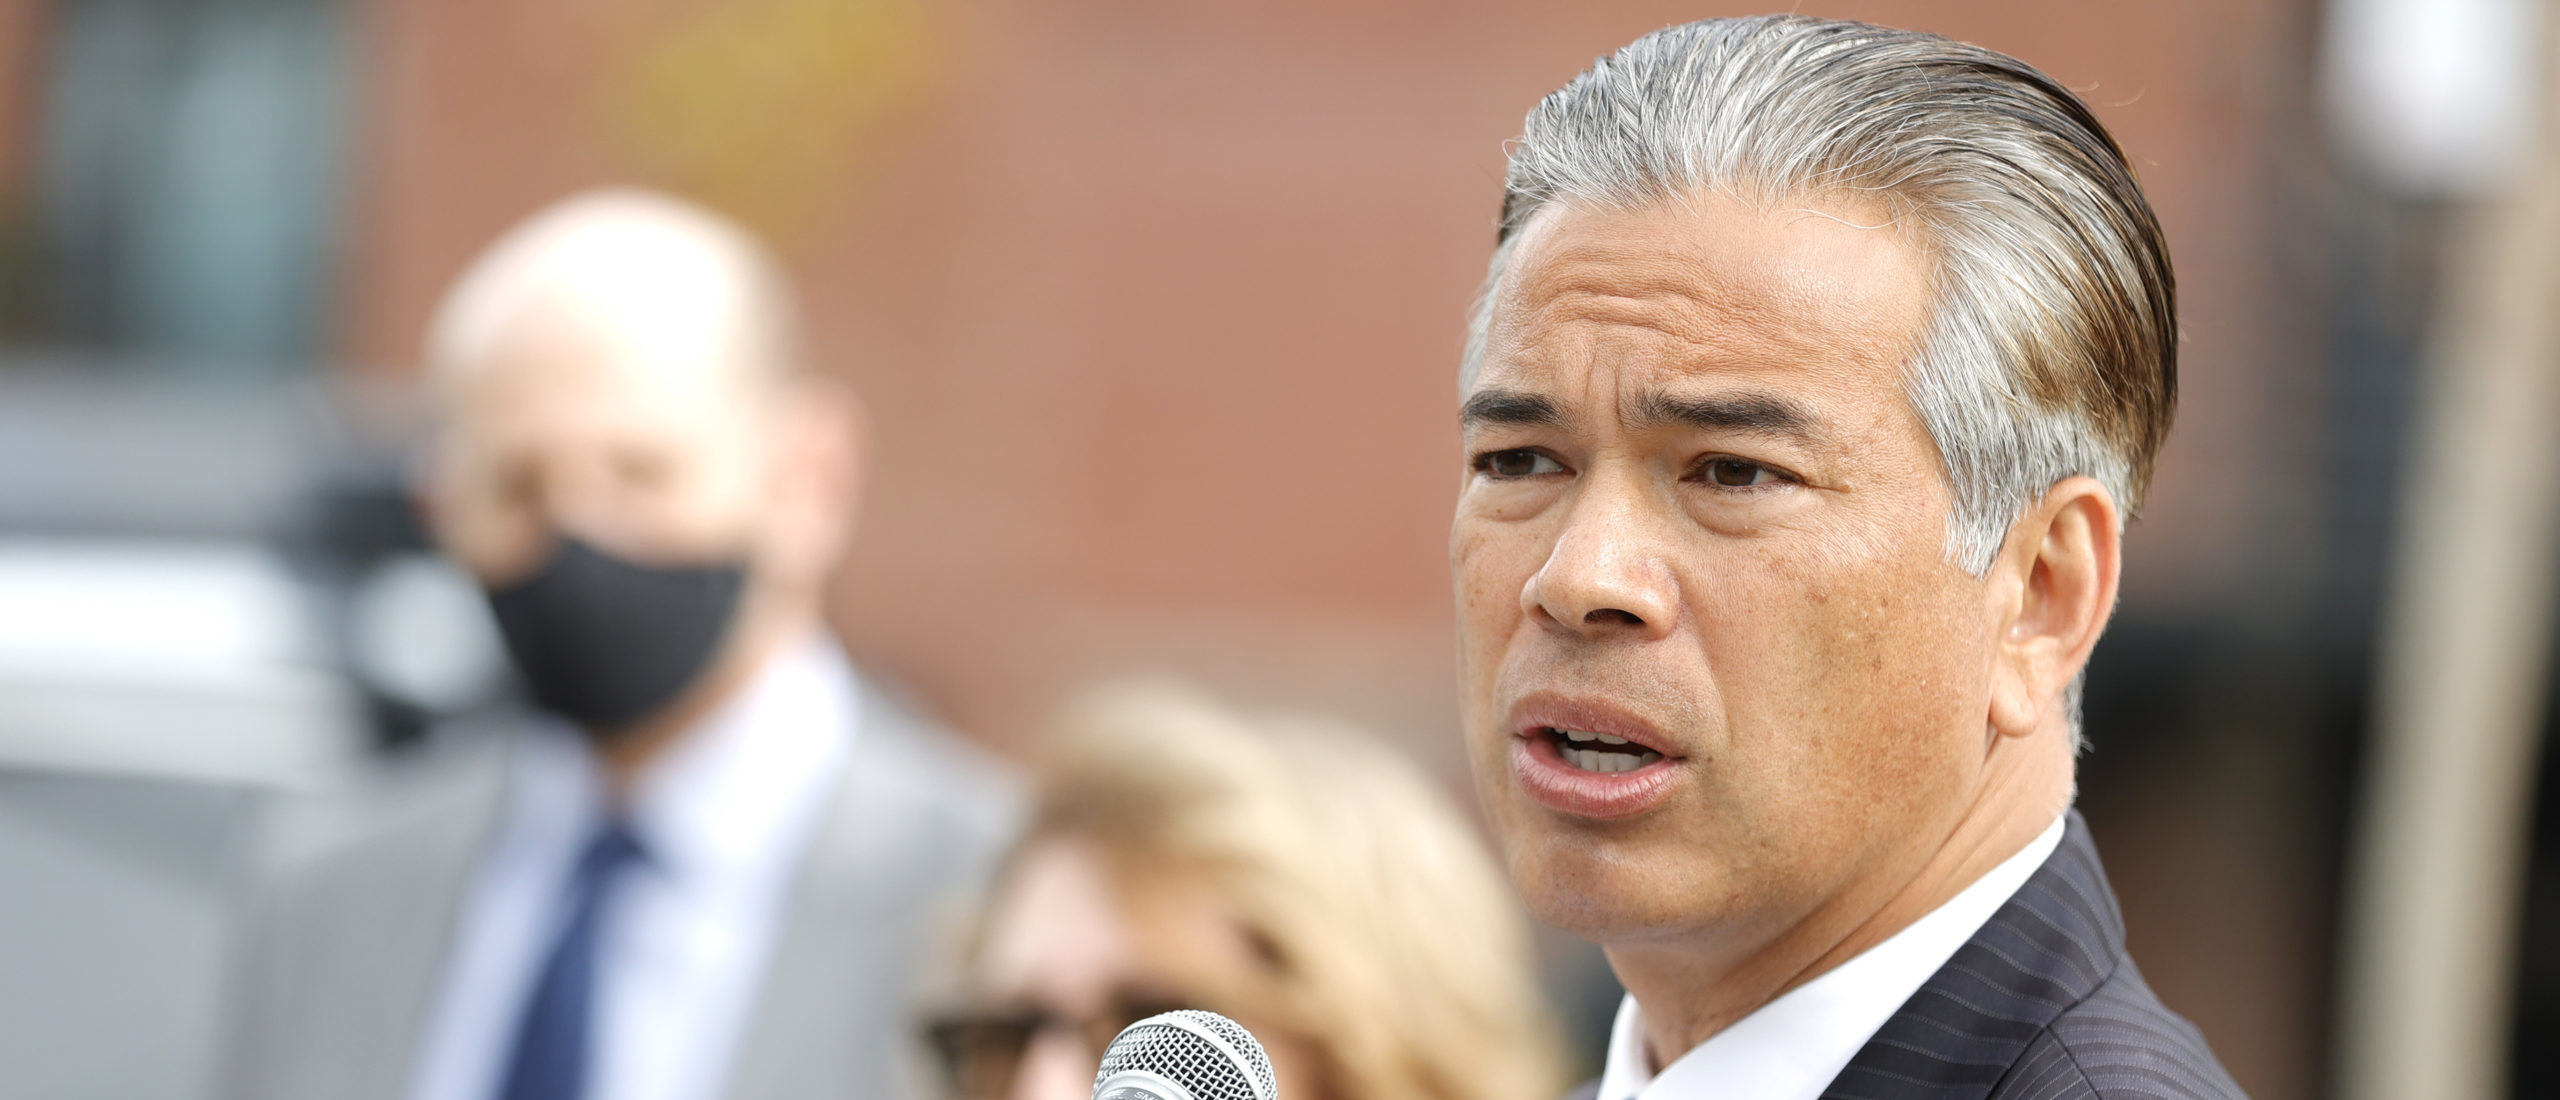 SAN FRANCISCO, CALIFORNIA - NOVEMBER 15: California Attorney General Rob Bonta speaks during a news conference outside of an Amazon distribution facility on November 15, 2021 in San Francisco, California. (Photo by Justin Sullivan/Getty Images)